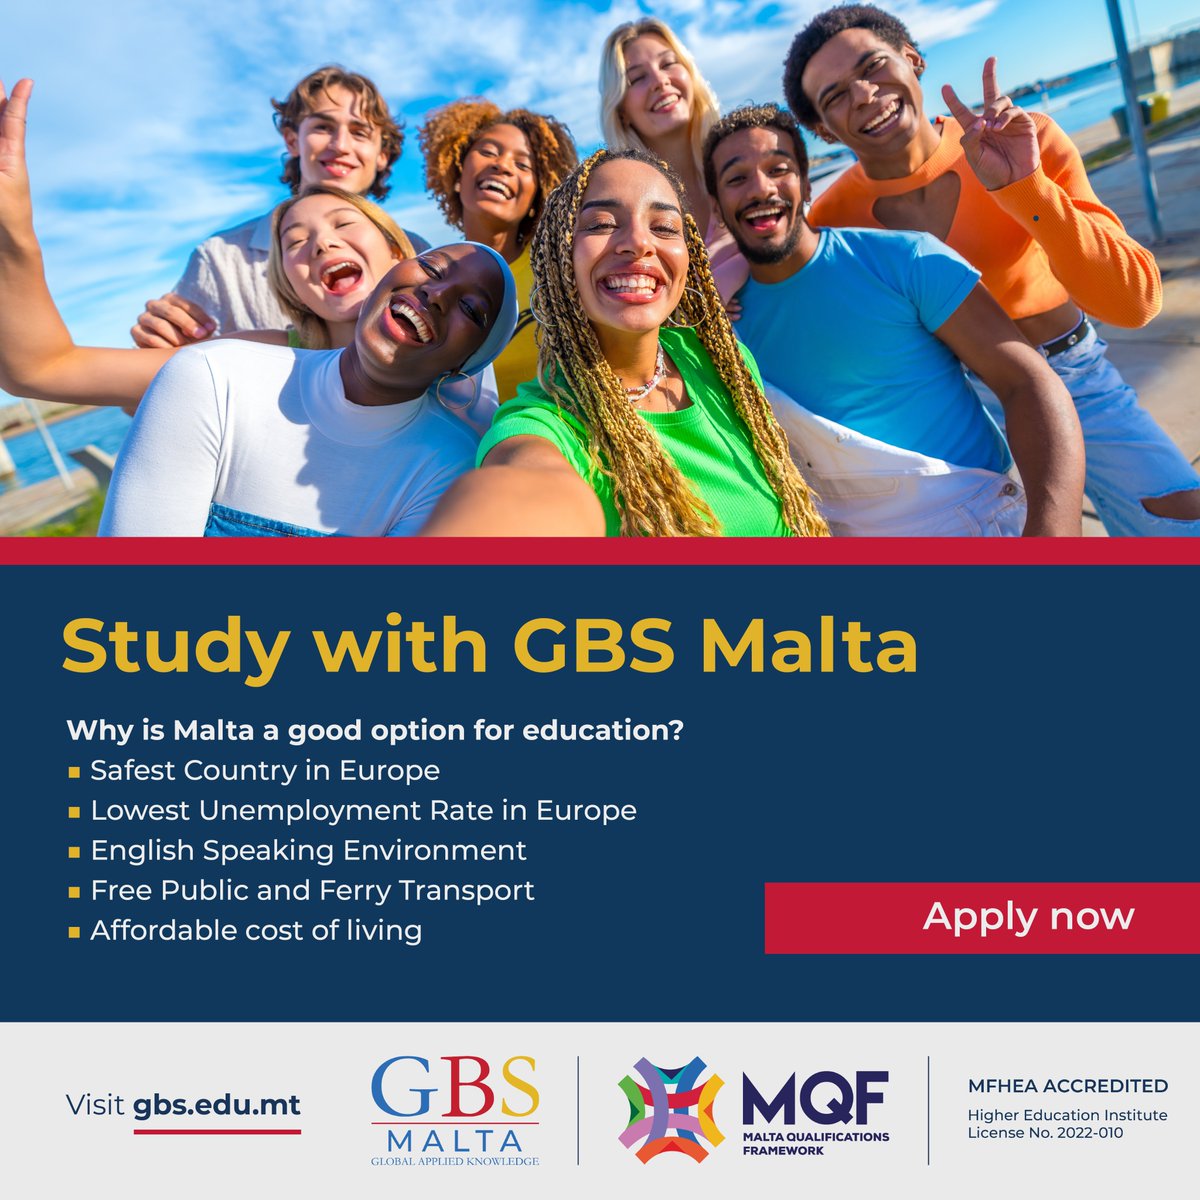 Work towards your academic potential in the heart of the Mediterranean!

#GBSMalta offers MFHEA approved programmes in a secure and thriving environment, boasting the lowest unemployment rate in Europe.

 Apply today: bit.ly/3IMsskU

#StudyinMalta #EuropeanEducation